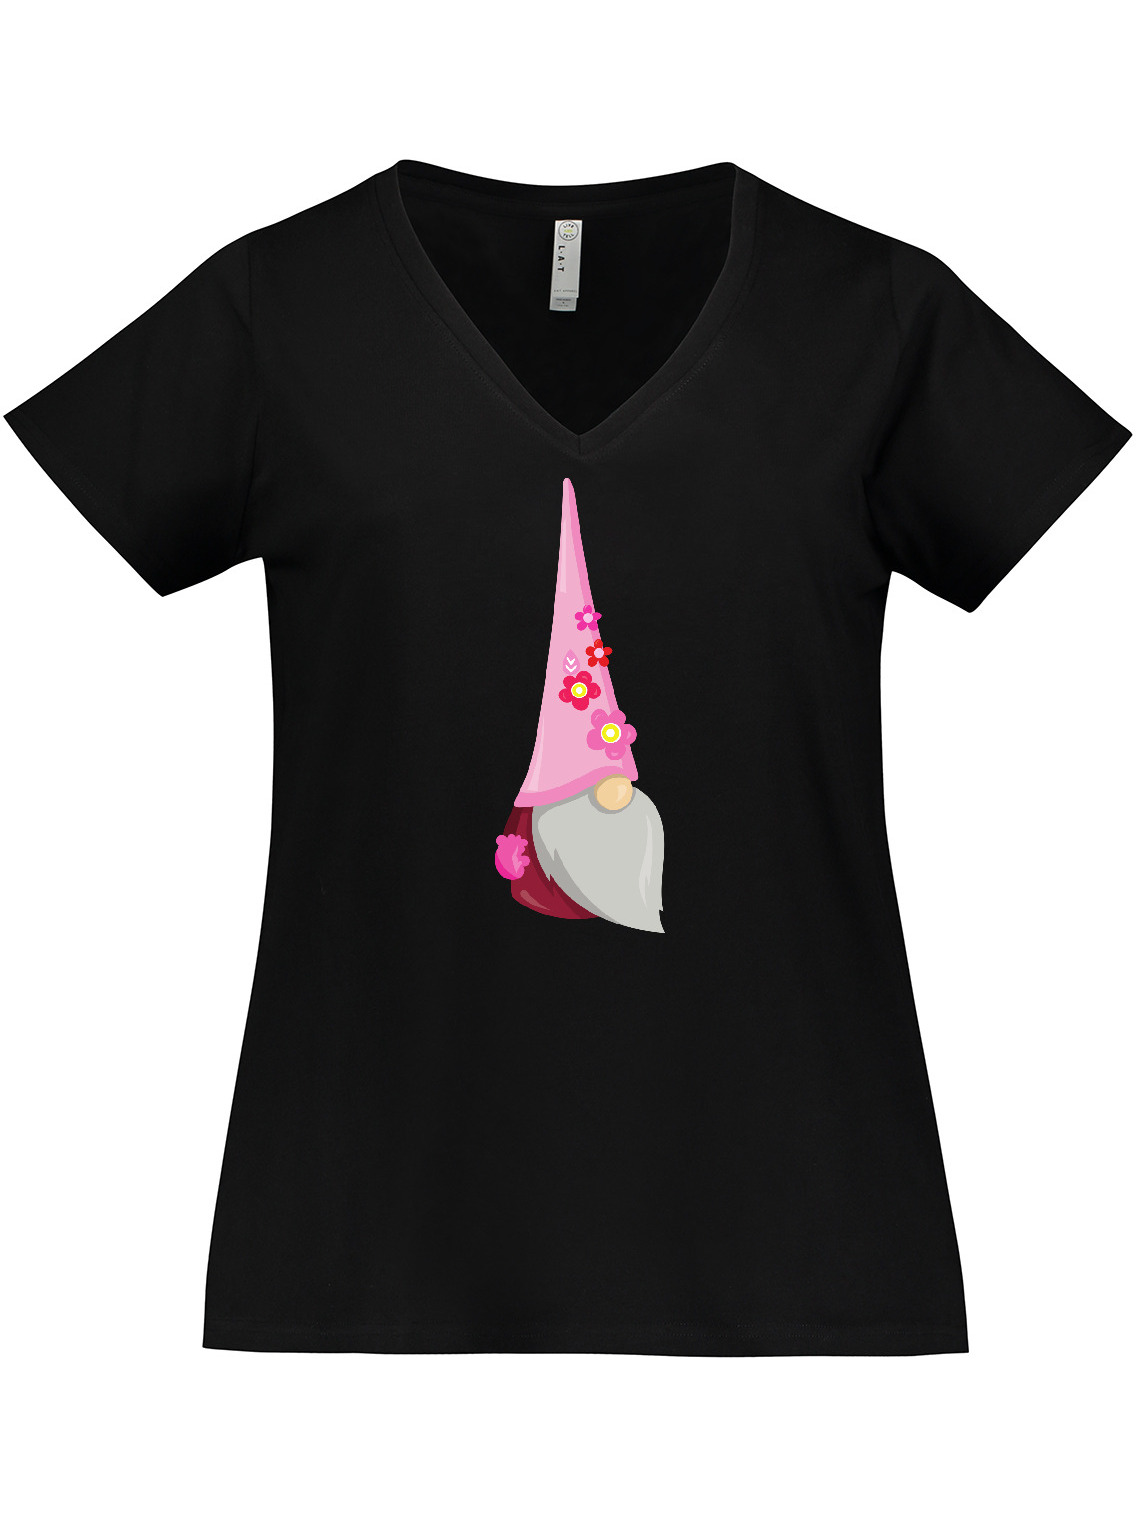 Inktastic Cute Gnome, Gnome With Pink Hat, Pink Flowers Women's Plus Size V-Neck T-Shirt - image 1 of 4